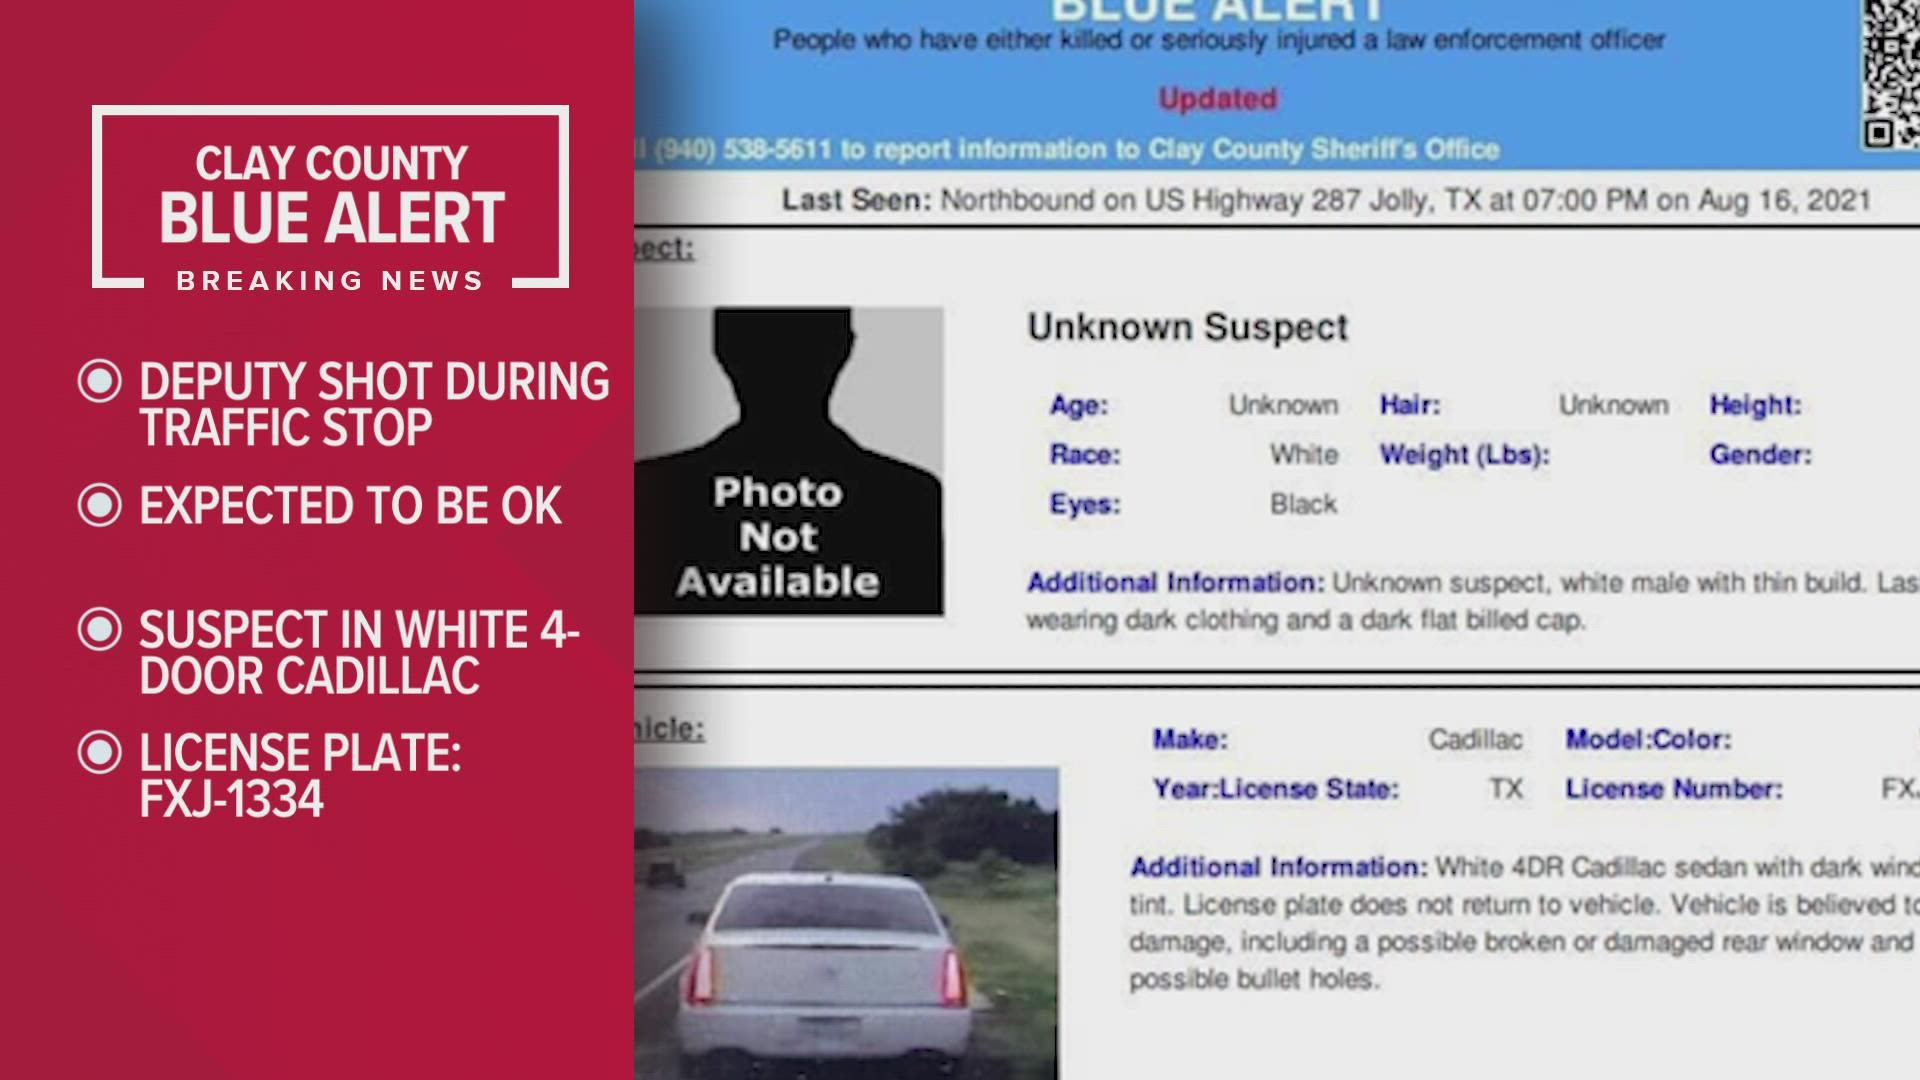 A Blue Alert is issued when an offender who killed or seriously injured a federal, state or local law enforcement officer in the line of duty is on the run.